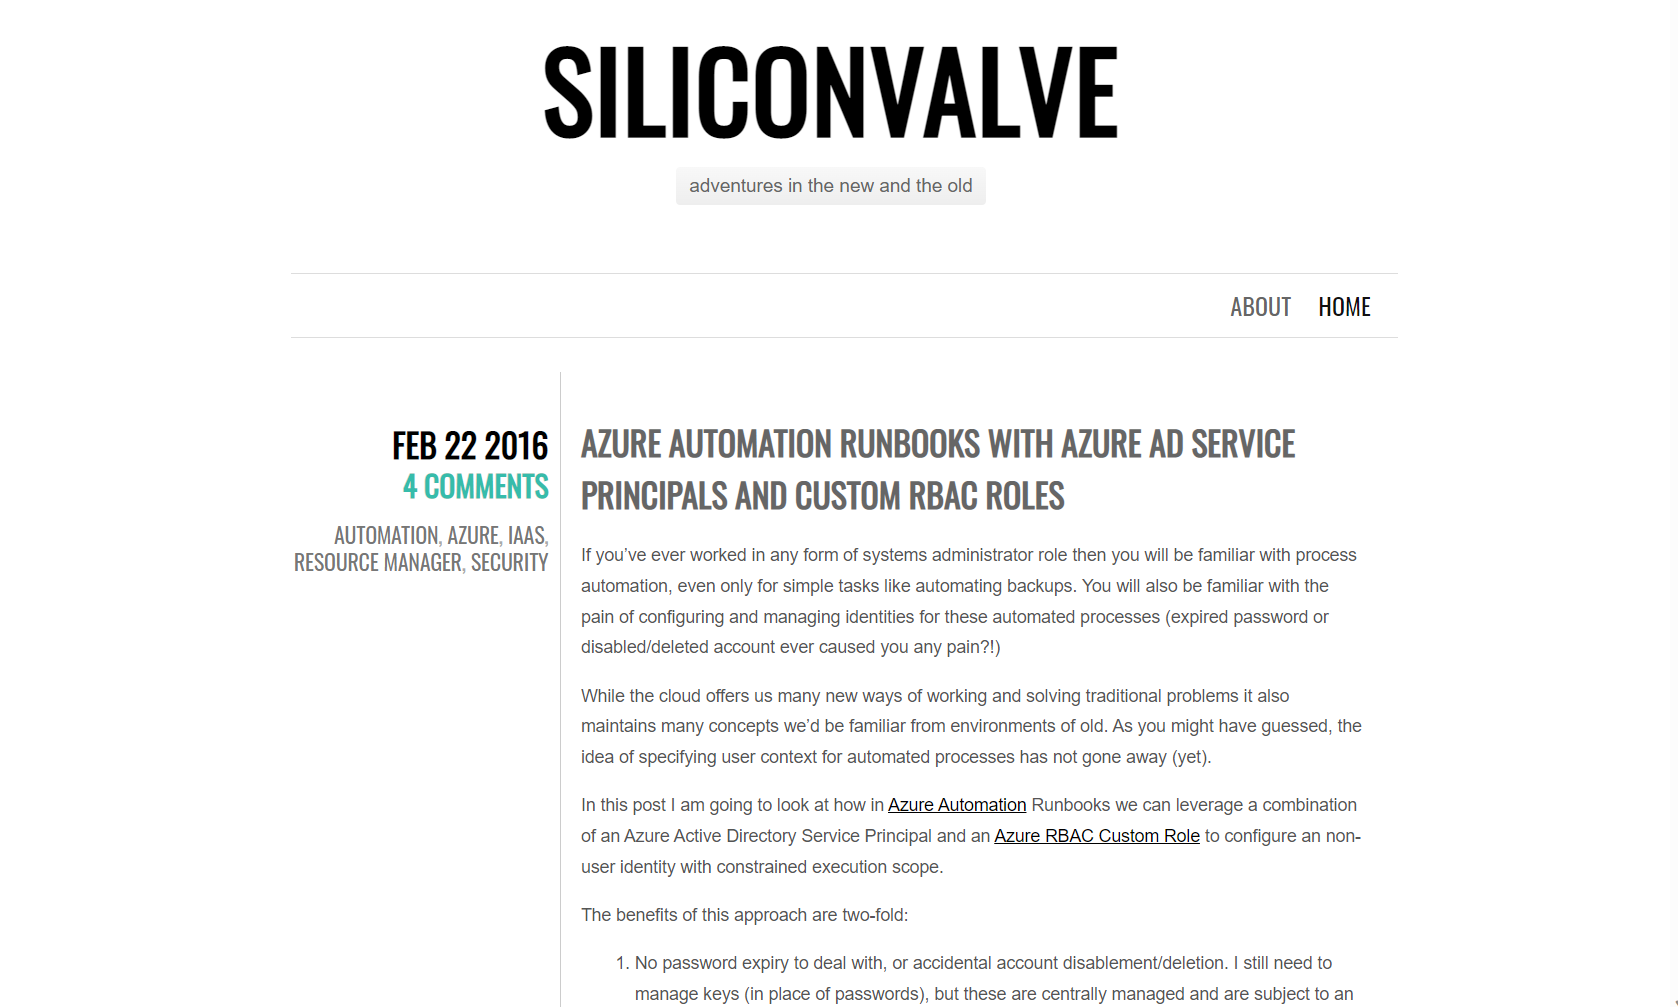 Siliconvalve blog from 2016.